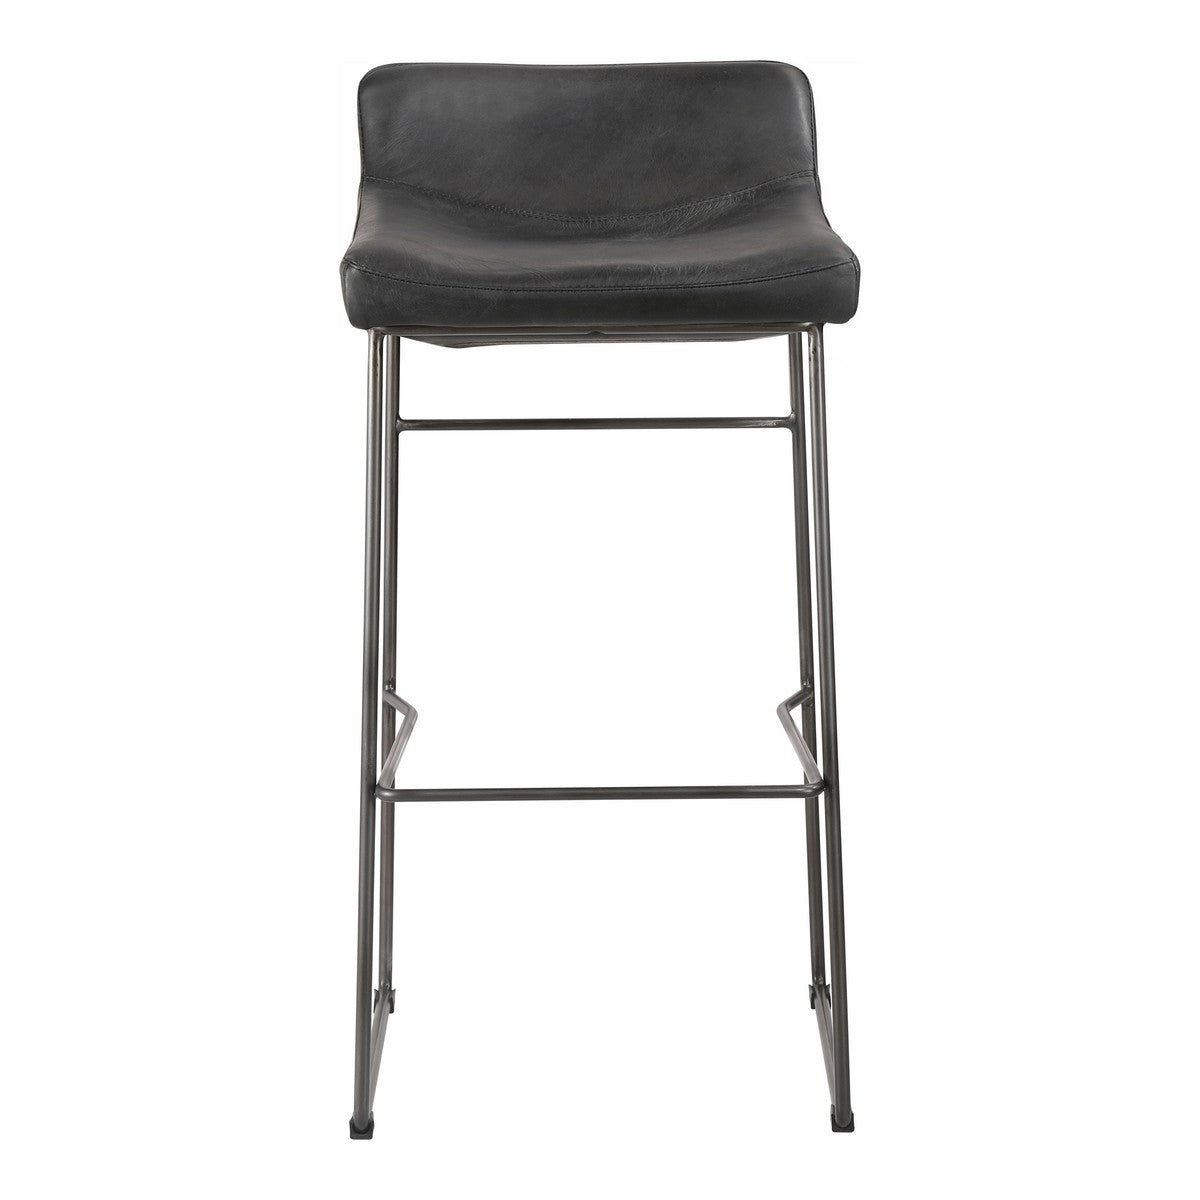 Moe's Home Collection Starlet Barstool Black-Set of Two - PK-1107-02 - Moe's Home Collection - Bar Stools - Minimal And Modern - 1